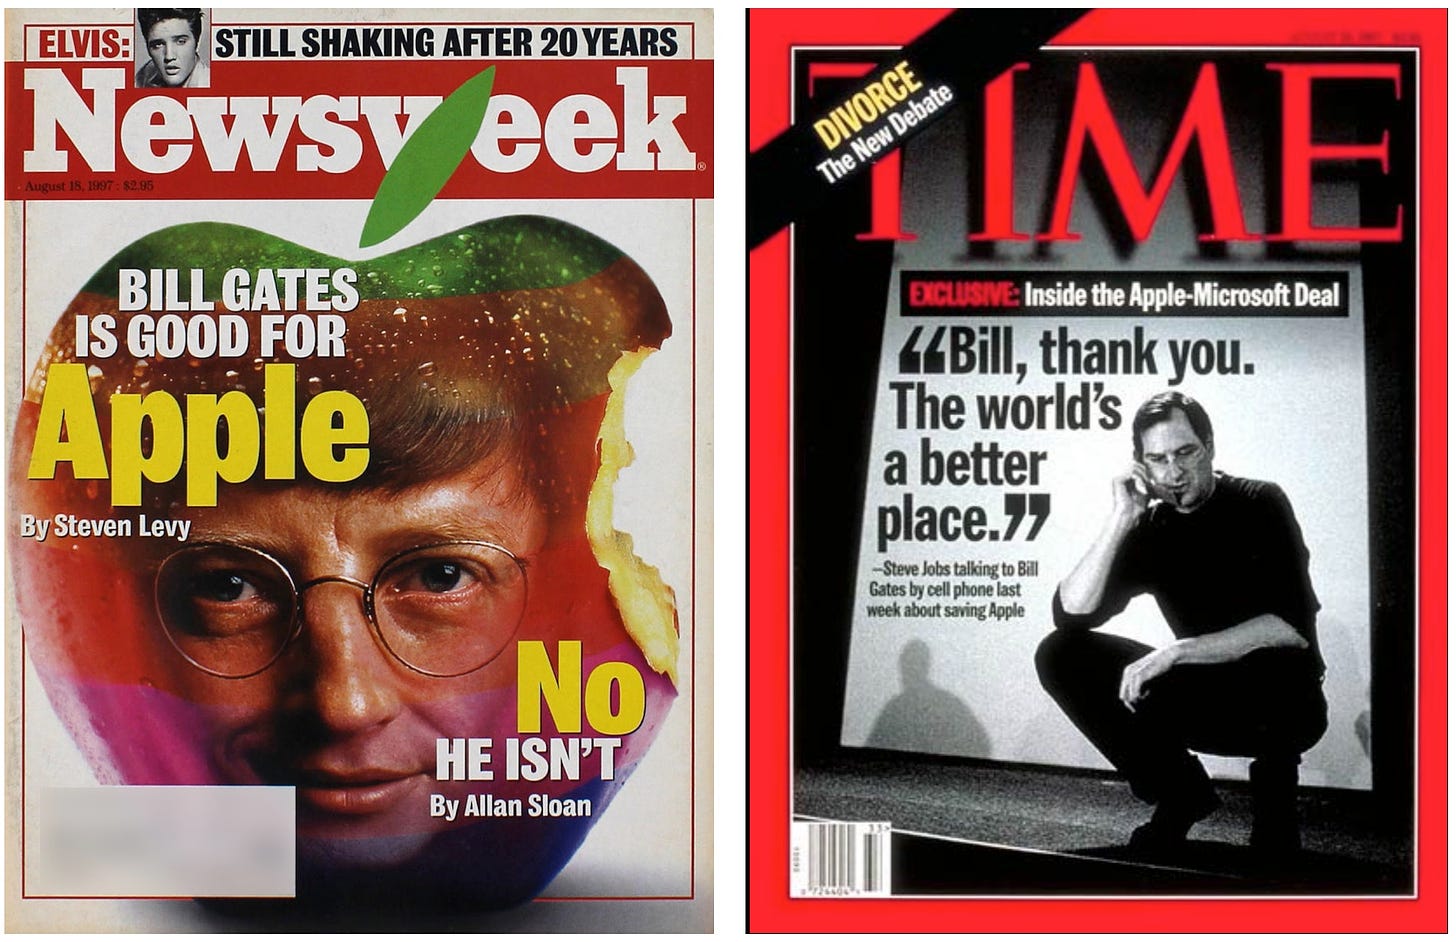 Two magazine covers. Newsweek "Bill Gates is good for Apple" and "No He isn't". And time Magazine with a photo of Steve Jobs on the phone and q quote "Bill, thank you. The world's a better place".